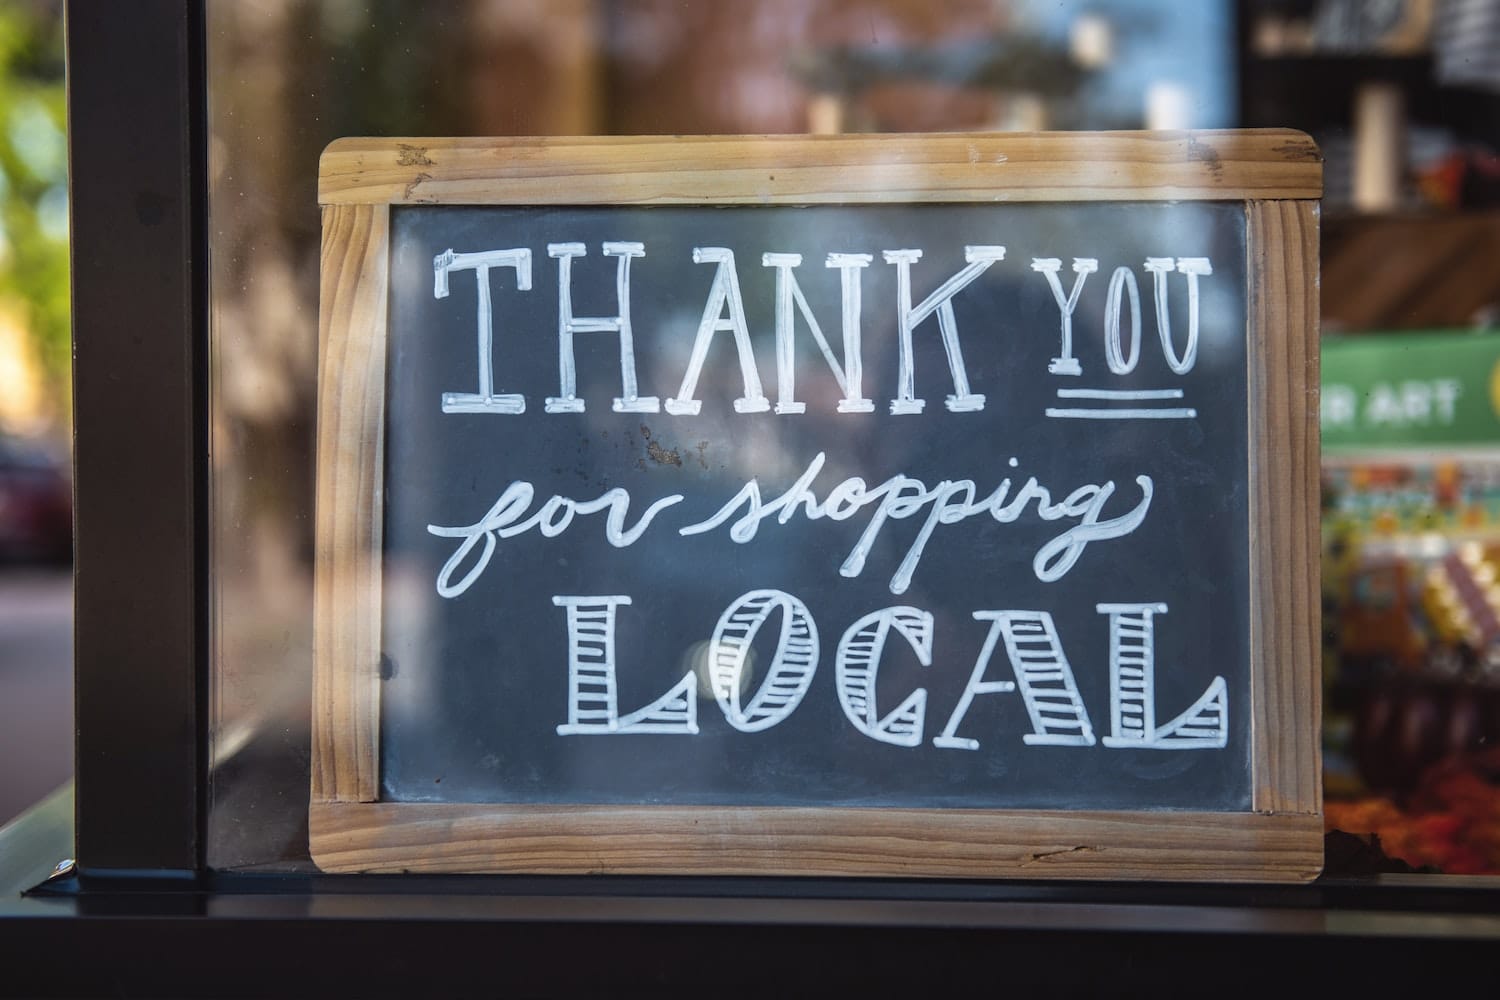 thank you for shopping local closed sign